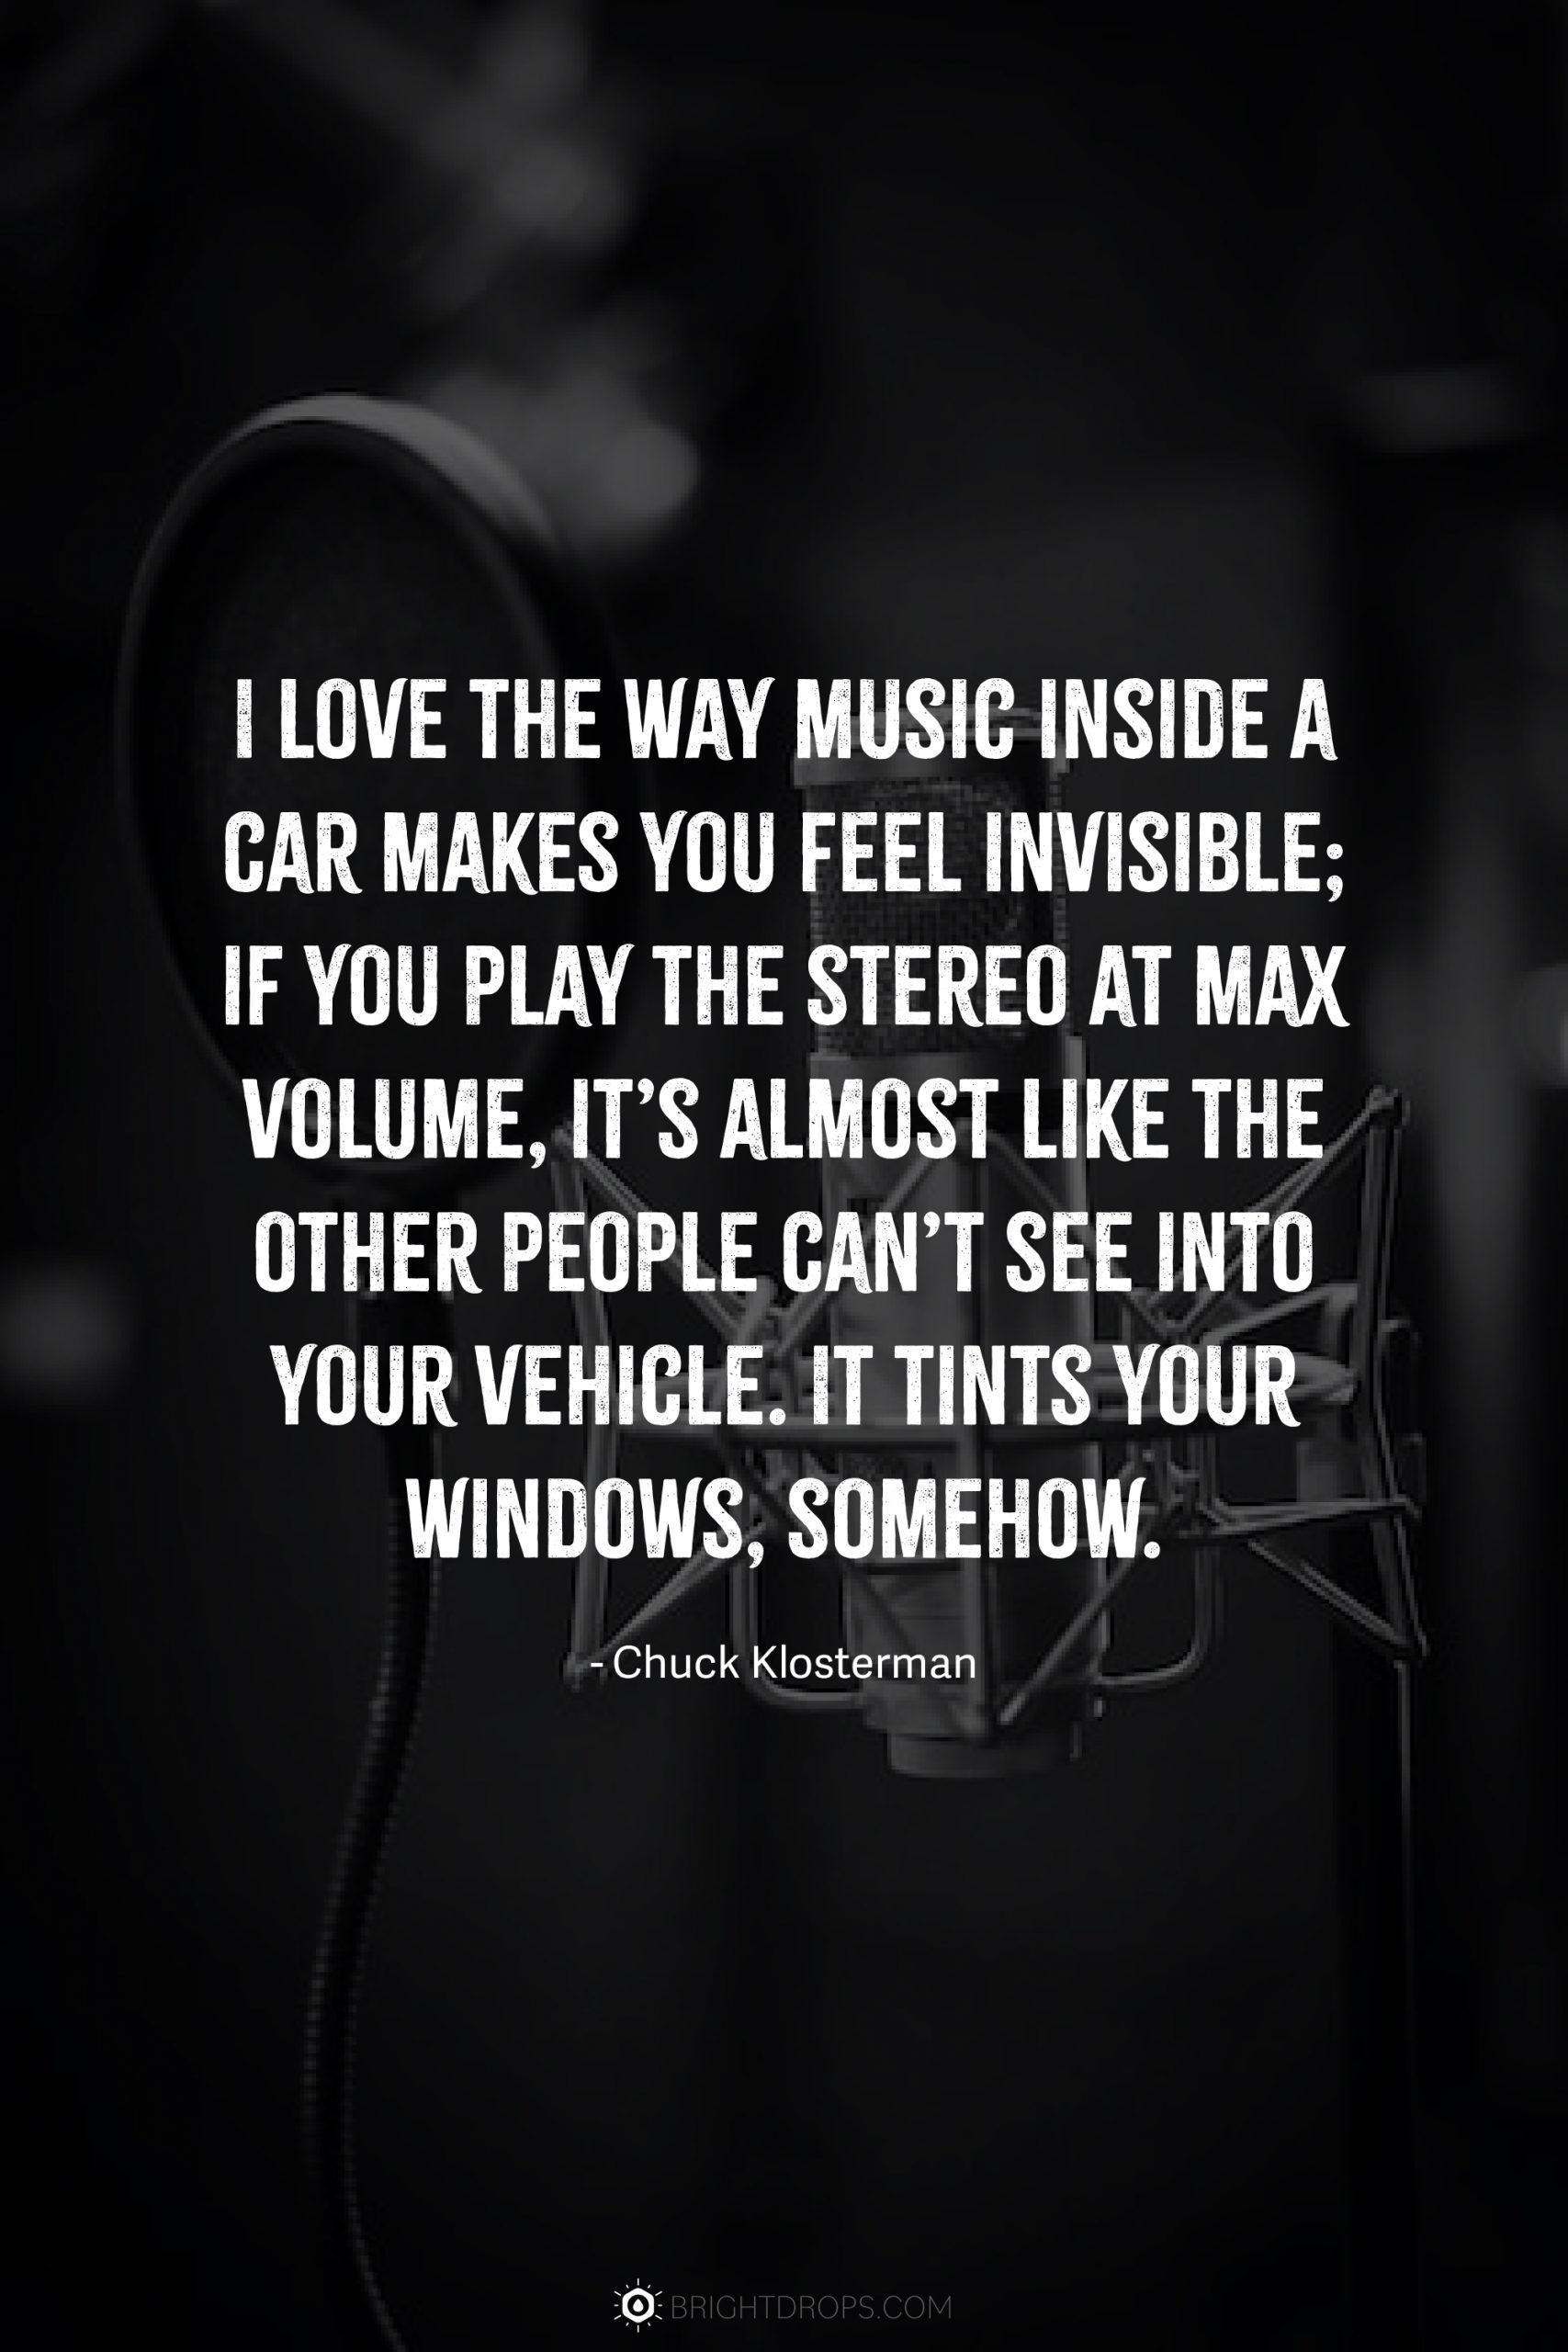 I love the way music inside a car makes you feel invisible; if you play the stereo at max volume, it’s almost like the other people can’t see into your vehicle. It tints your windows, somehow.